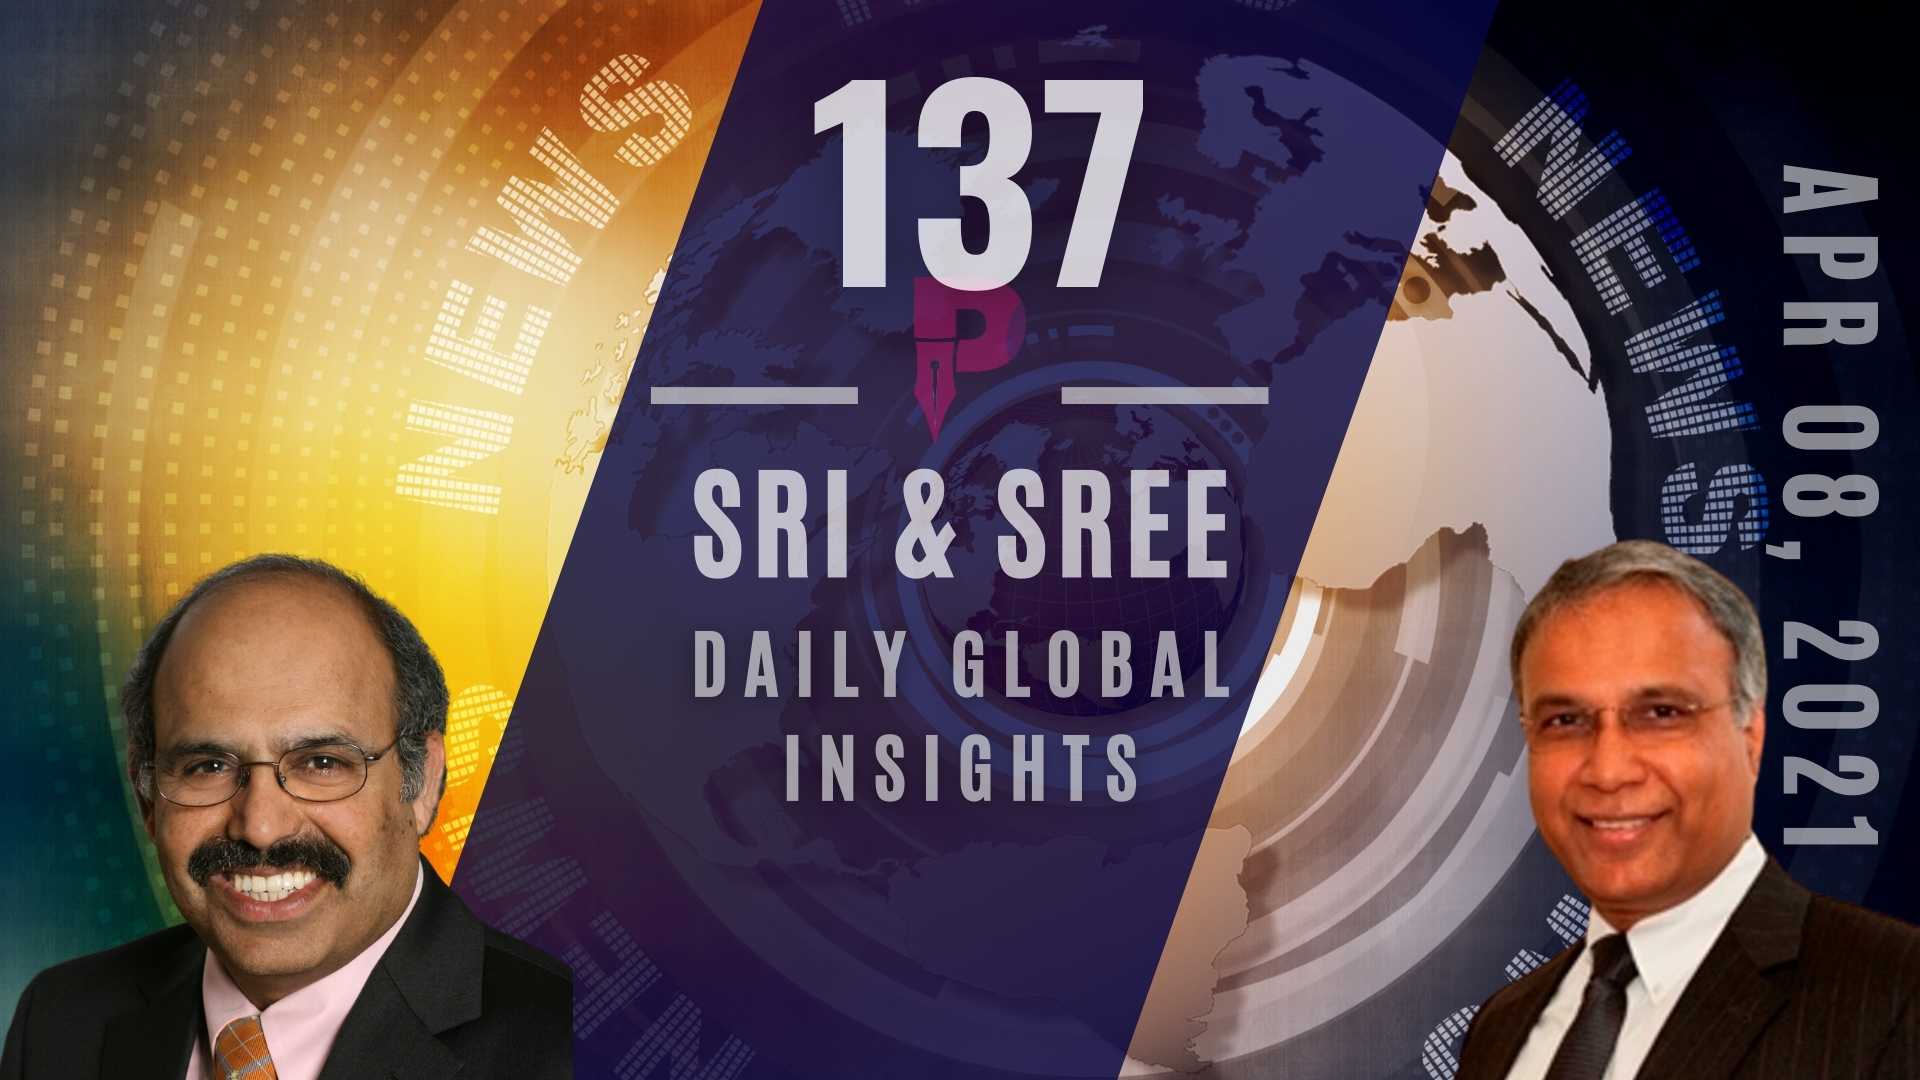 EP137 Indian Vaccine Diplomacy win for India in Uruguay, China warns the US on Olympics, Iran: No talks until all sanctions lifted, Modi government approves 4500 Crore Scheme for Solar PV modules & more!